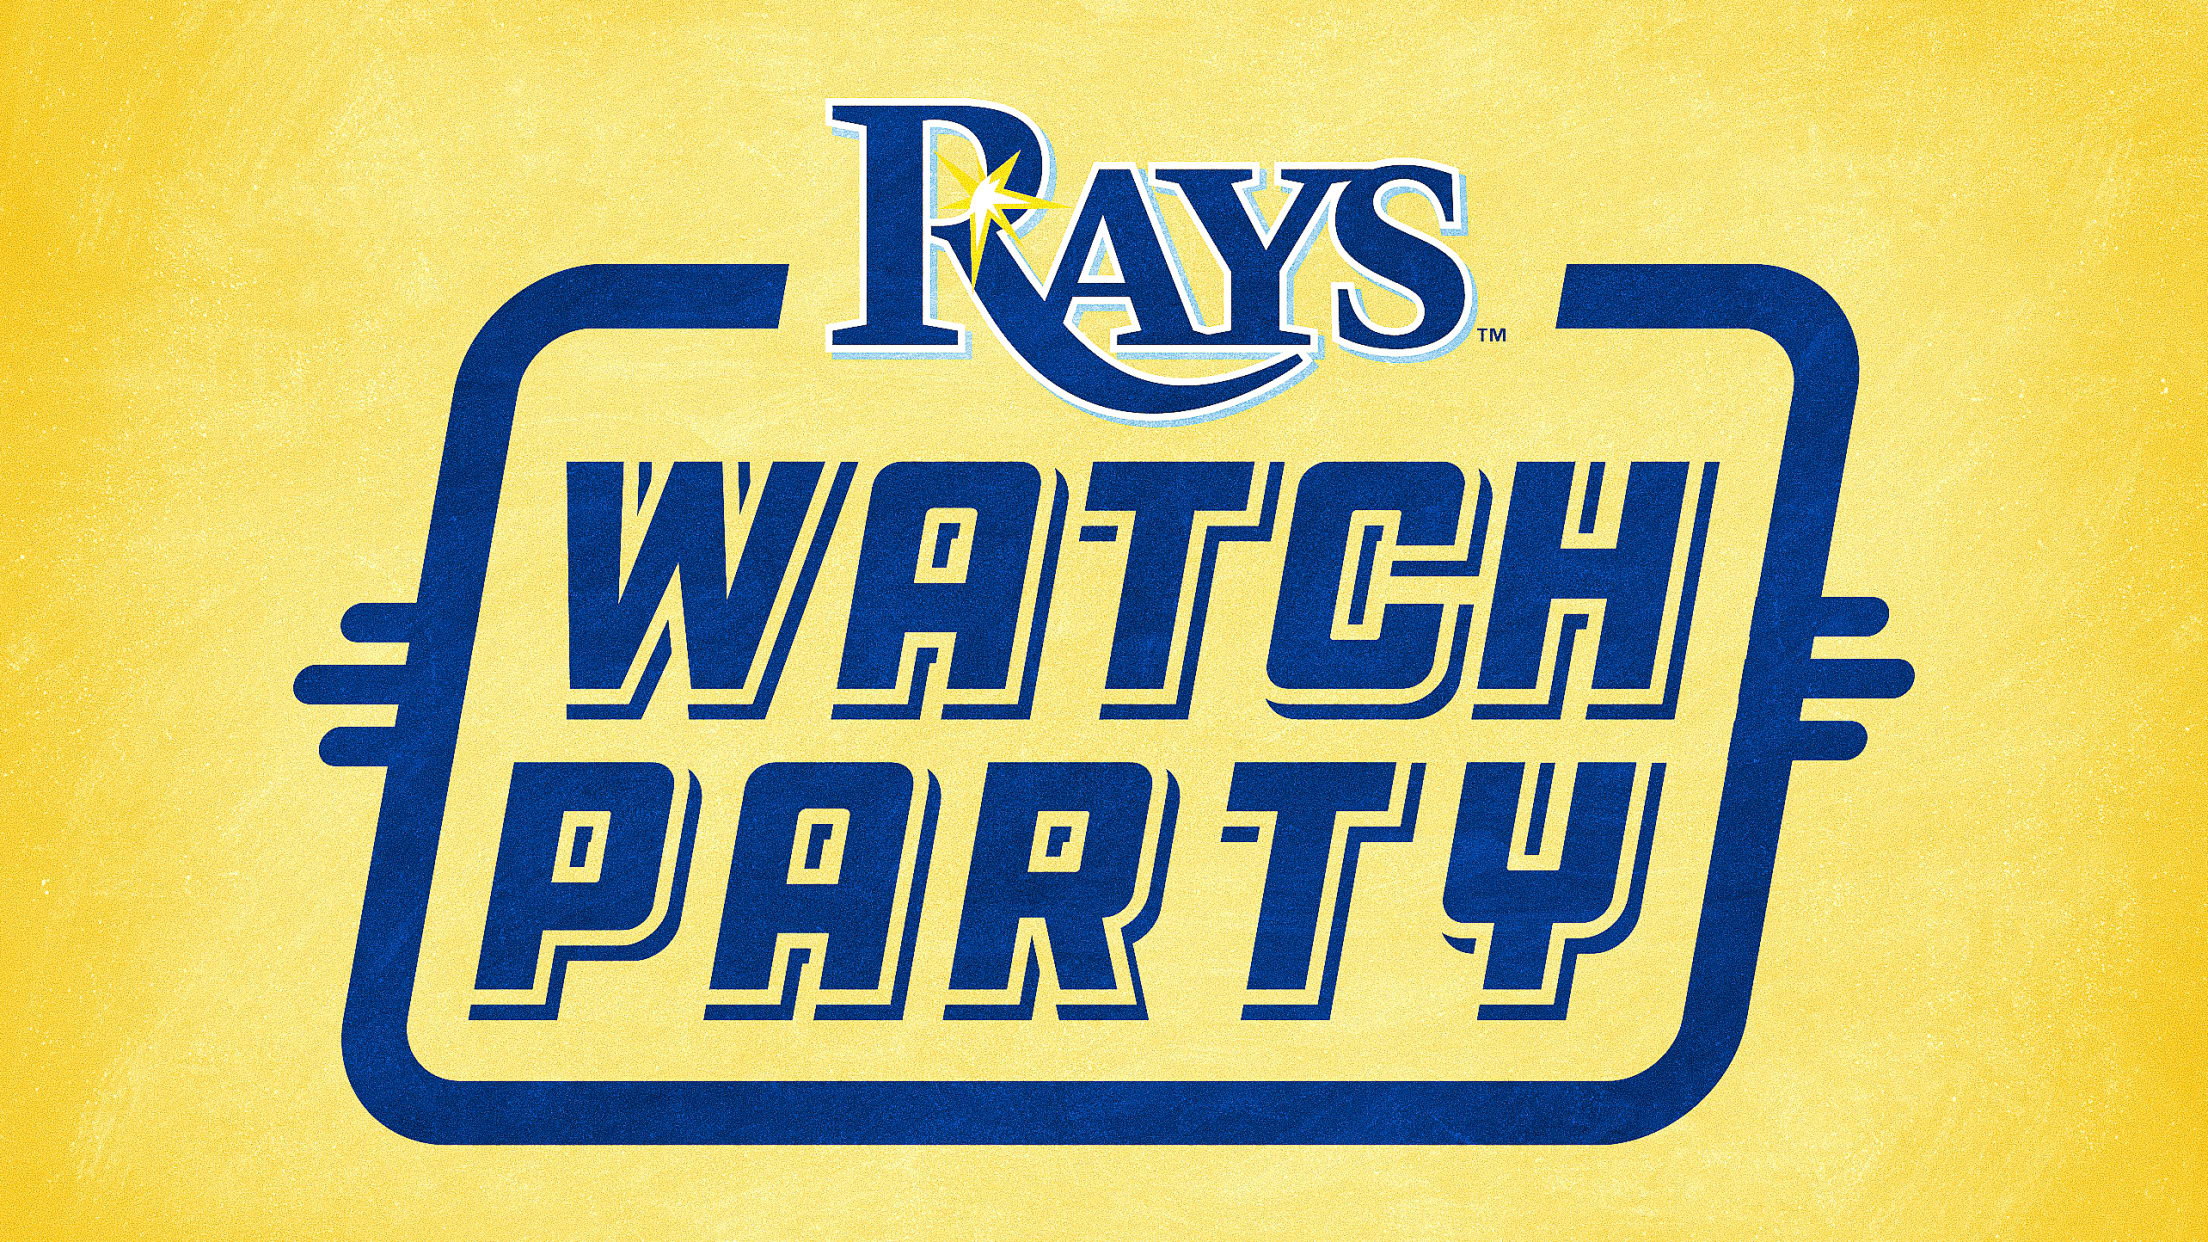 Rays Watch Party Fans Tampa Bay Rays